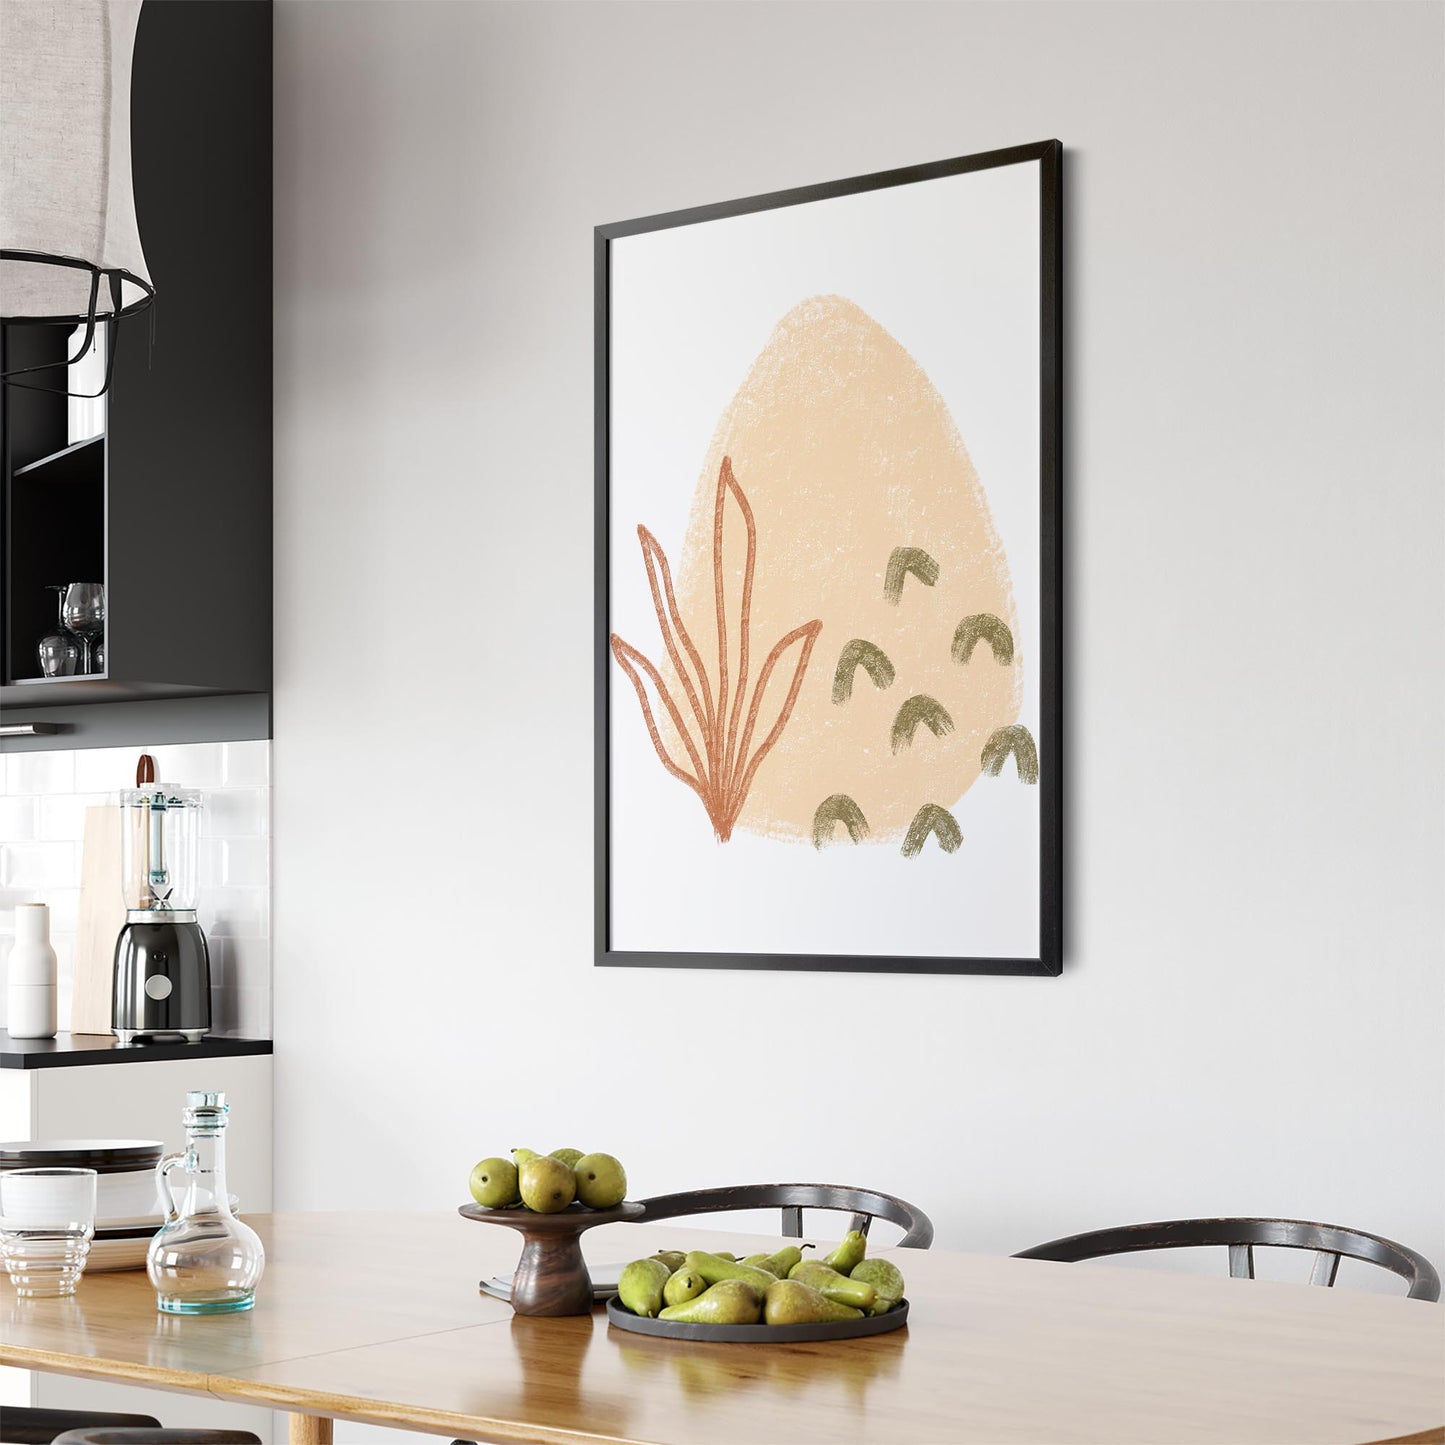 Minimal Plant Abstract Retro Kitchen Wall Art #1 - The Affordable Art Company